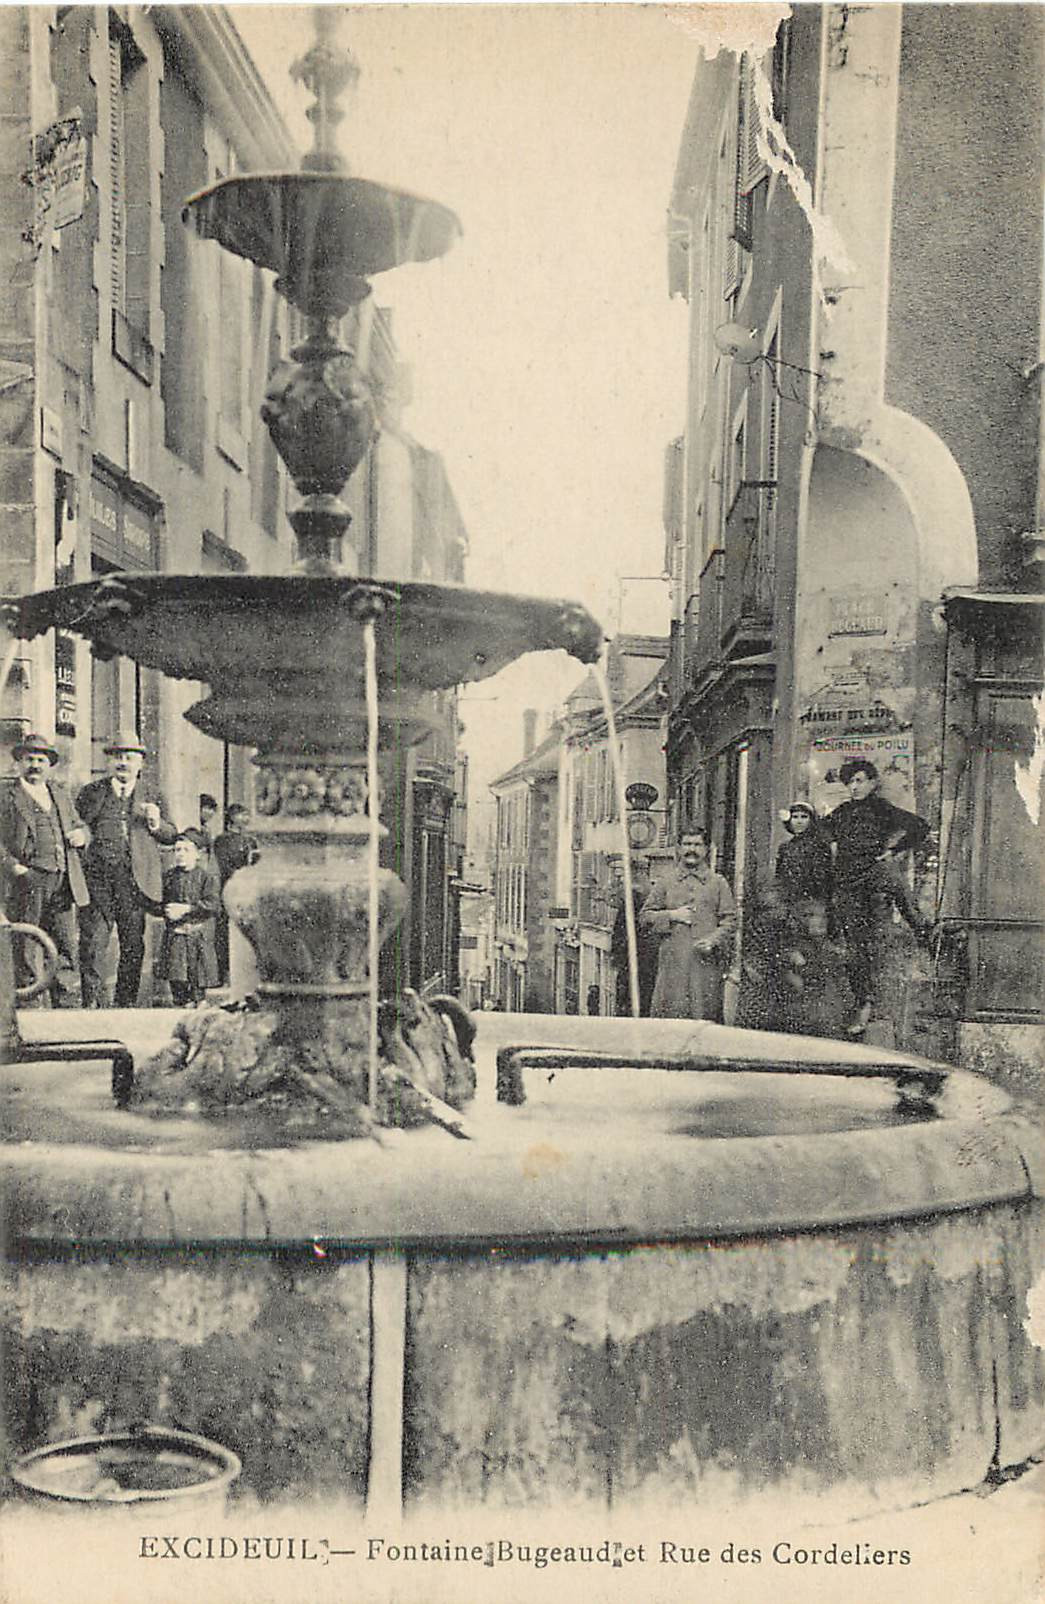 WW 24 EXCIDEUIL. Fontaine Bugeaud rue des Cordeliers 1917